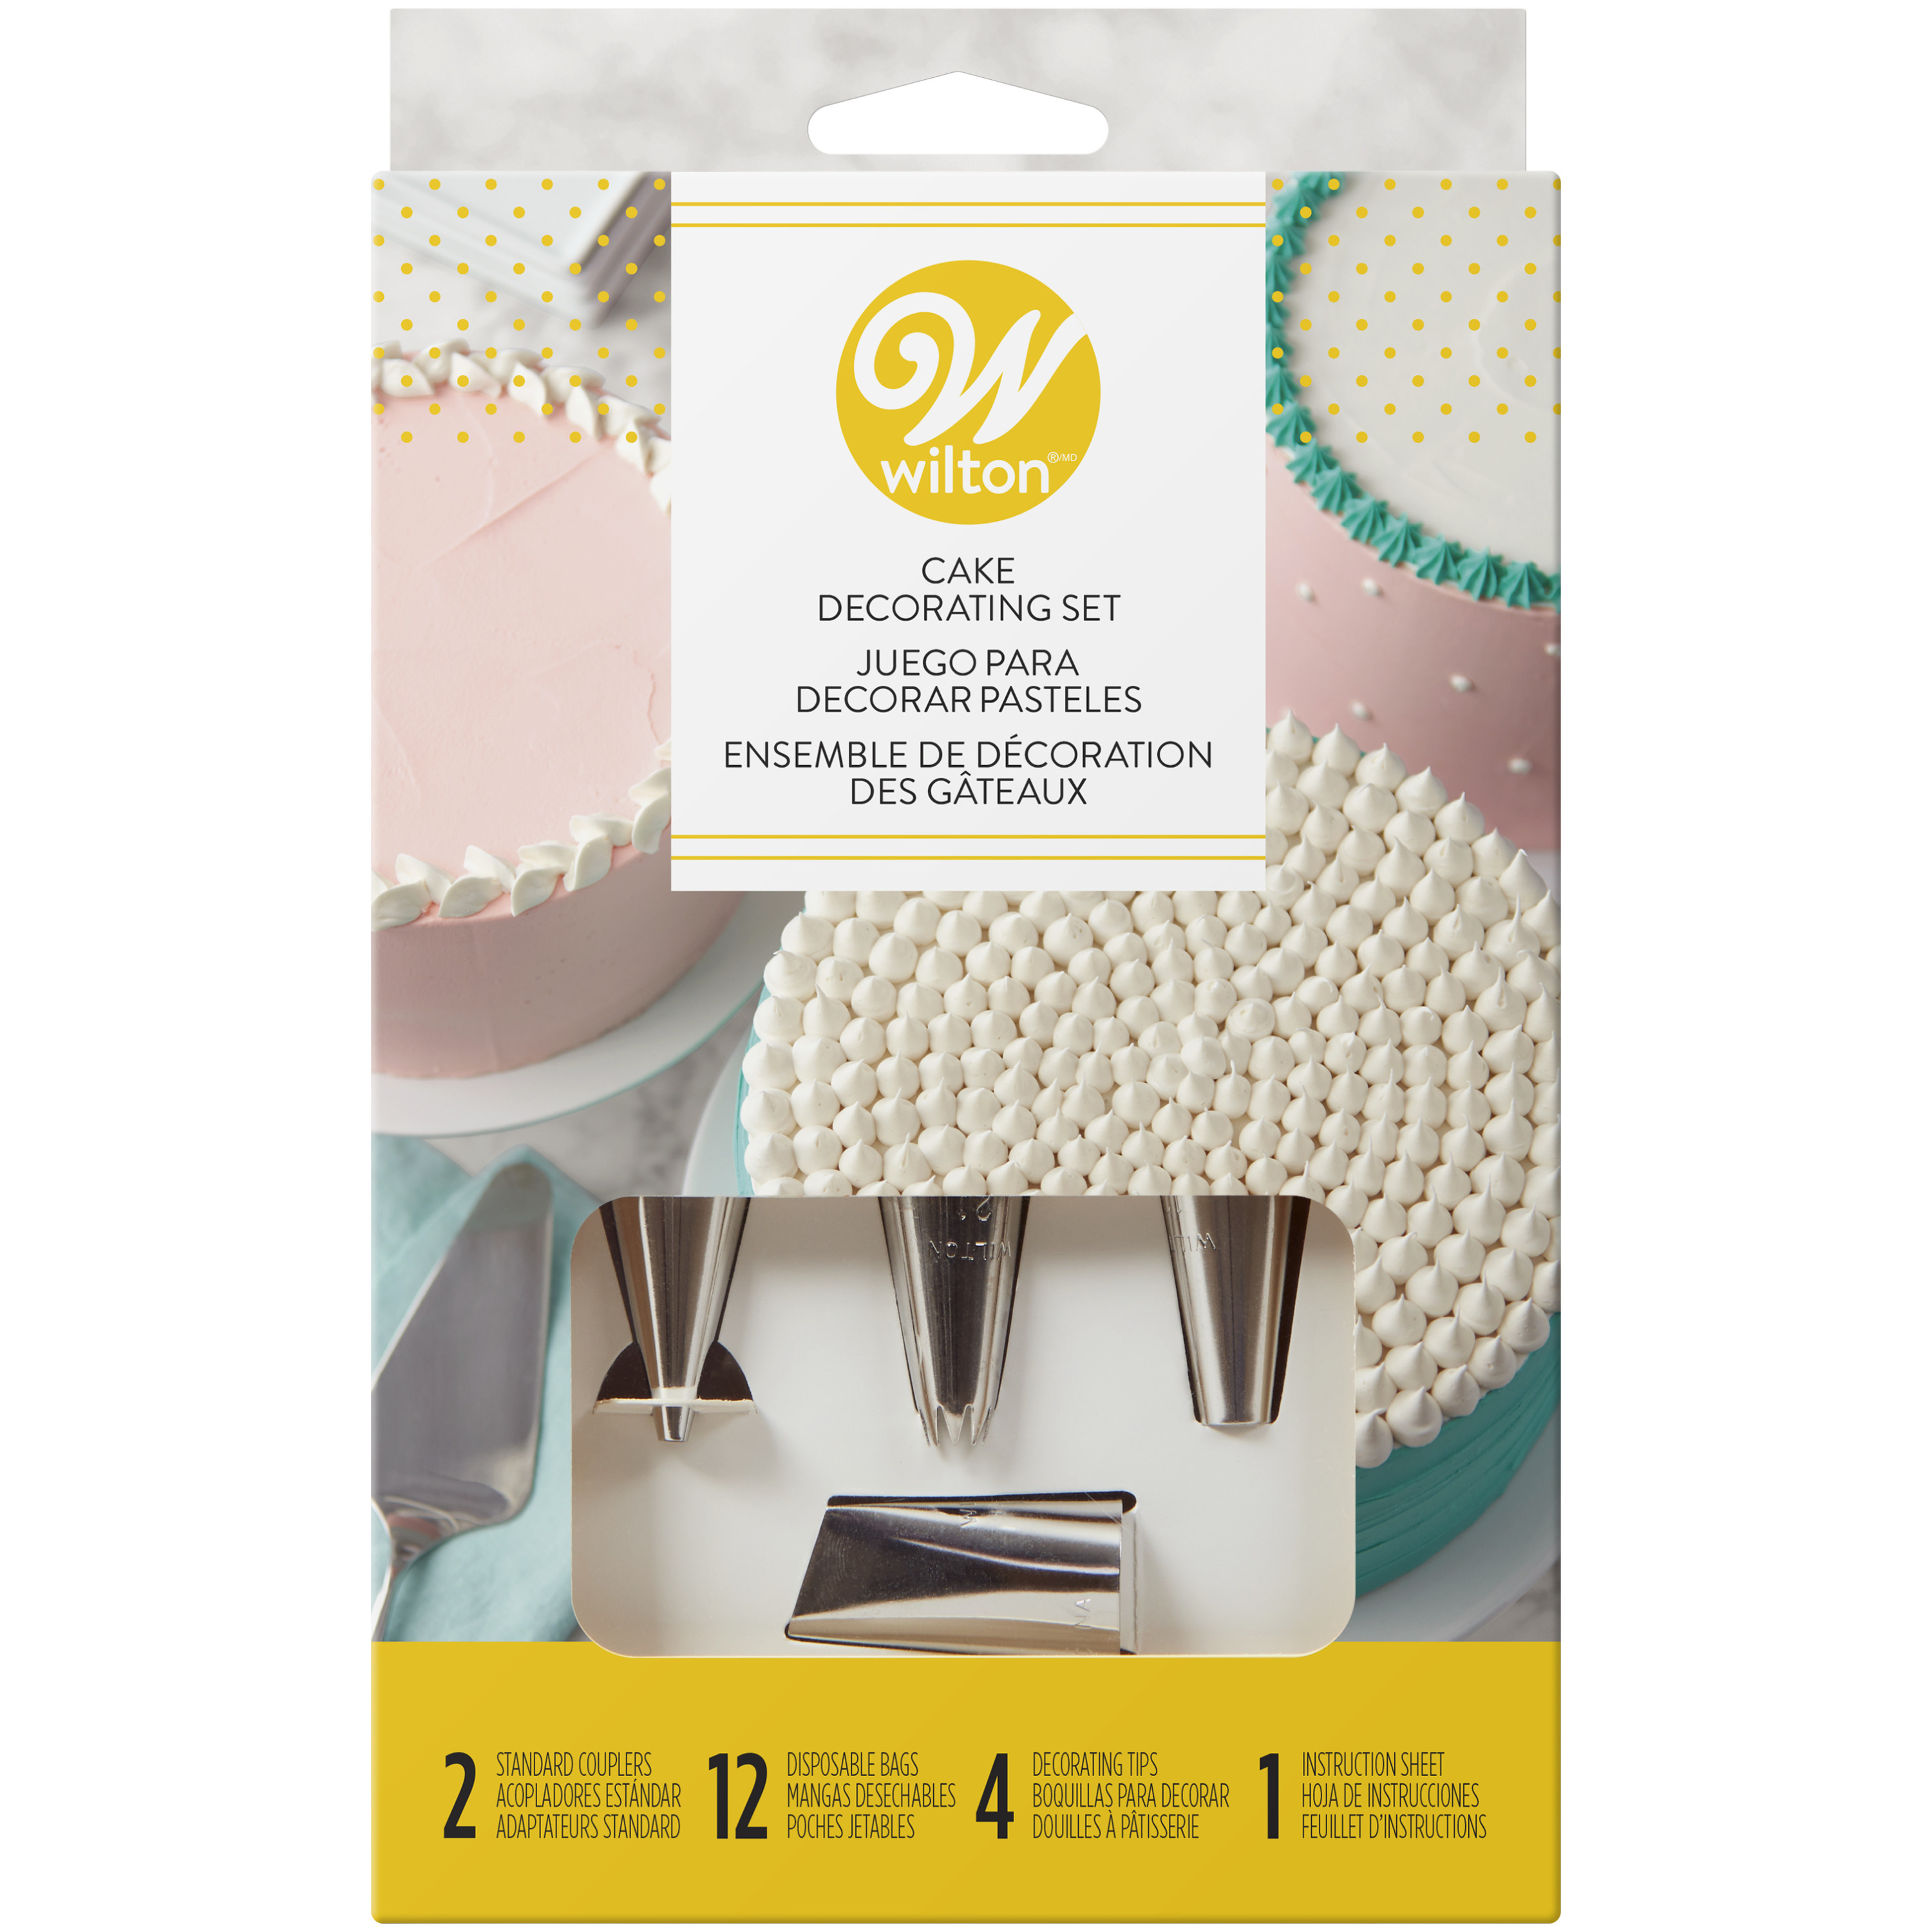 Wilton Cake Decorating Set with Piping Tips, Decorating Bags, Couplers and Instructions, 18-Piece - image 1 of 8